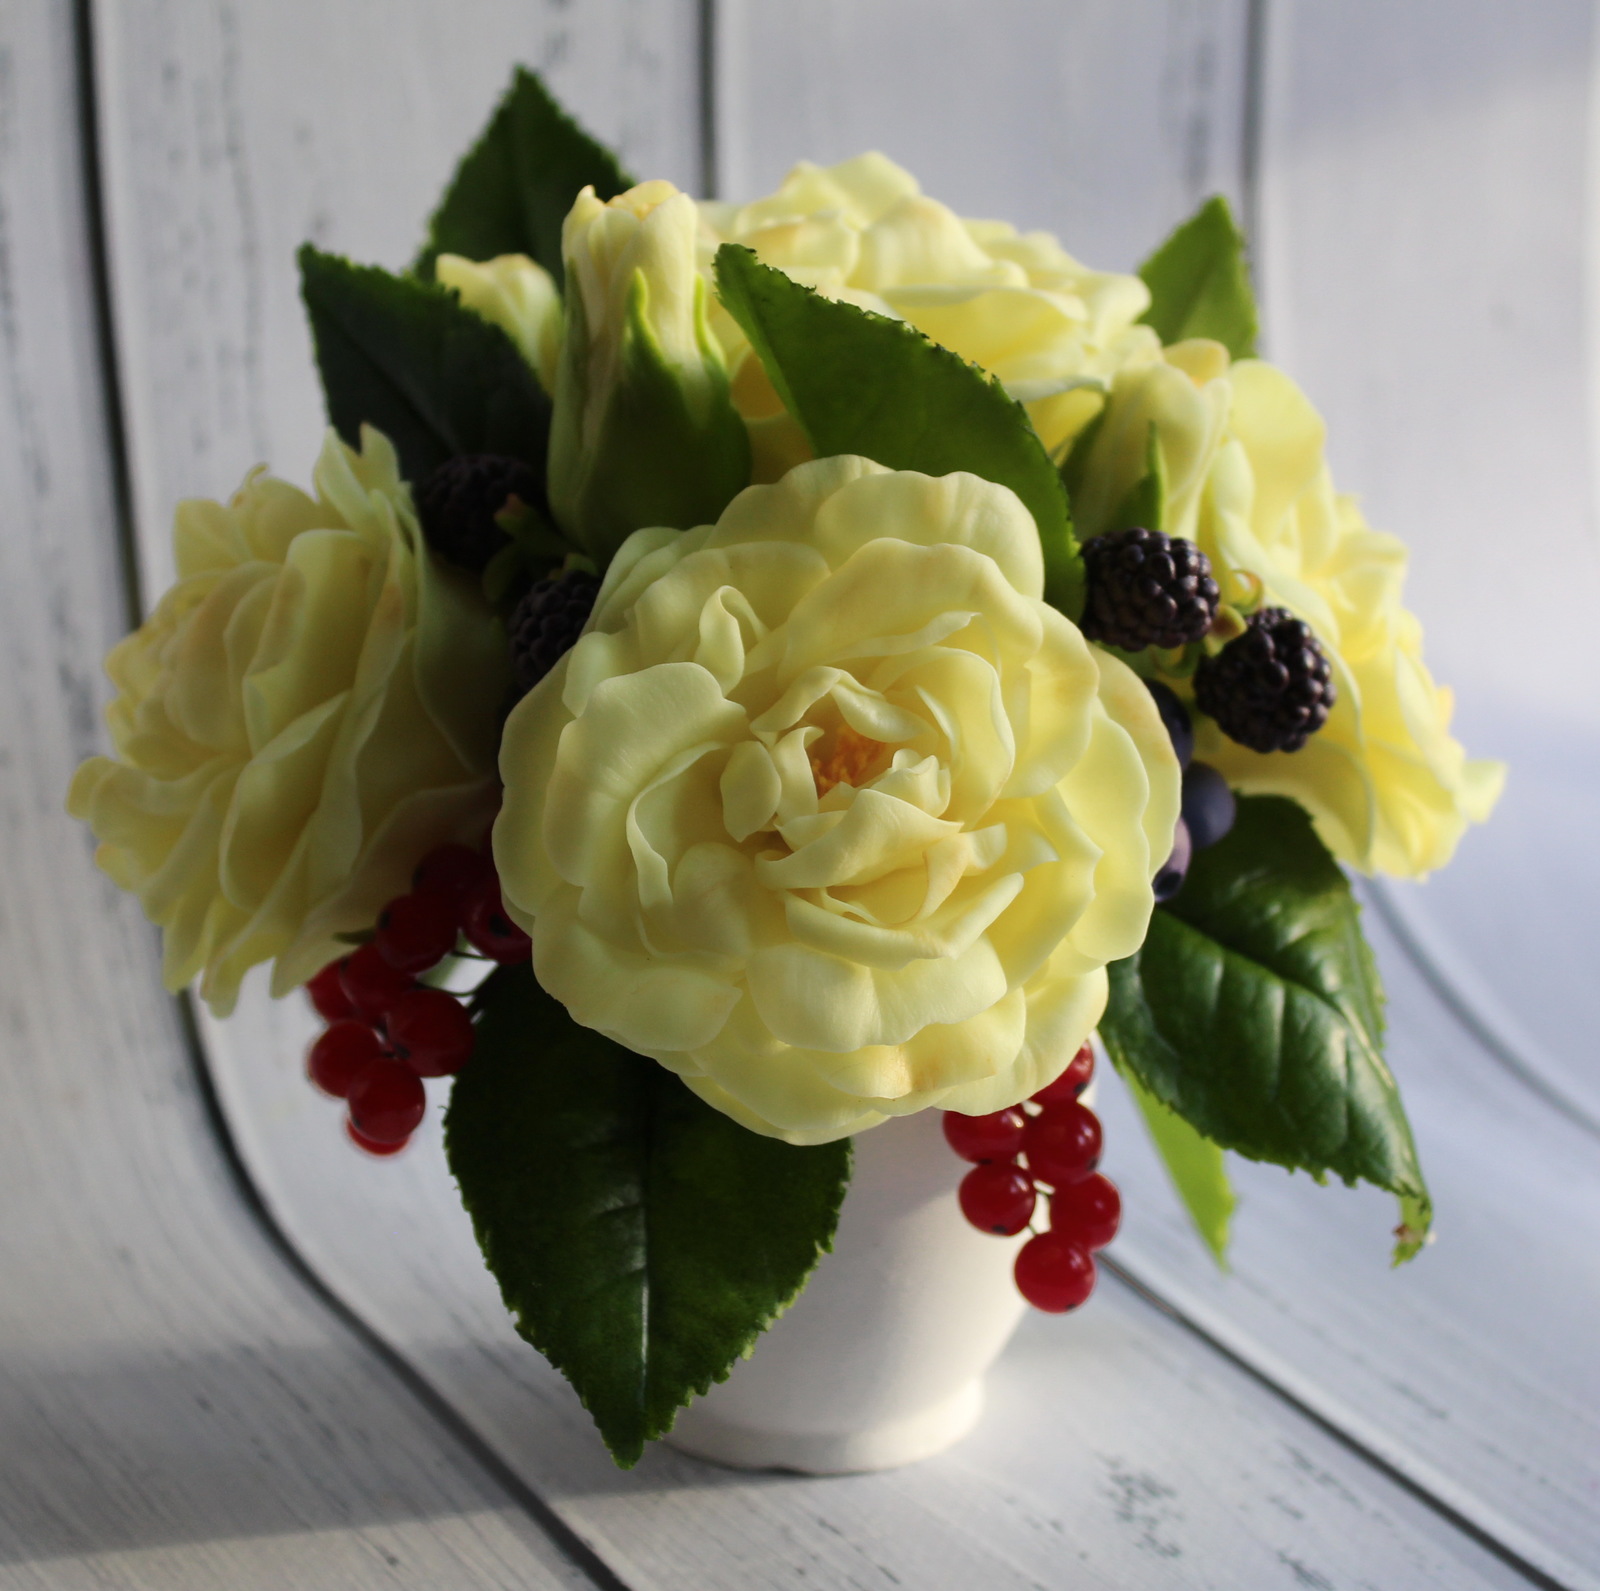 Flower and berry bouquet - Polymer clay, Лепка, Blackberry, Red Ribes, Currant, , , My